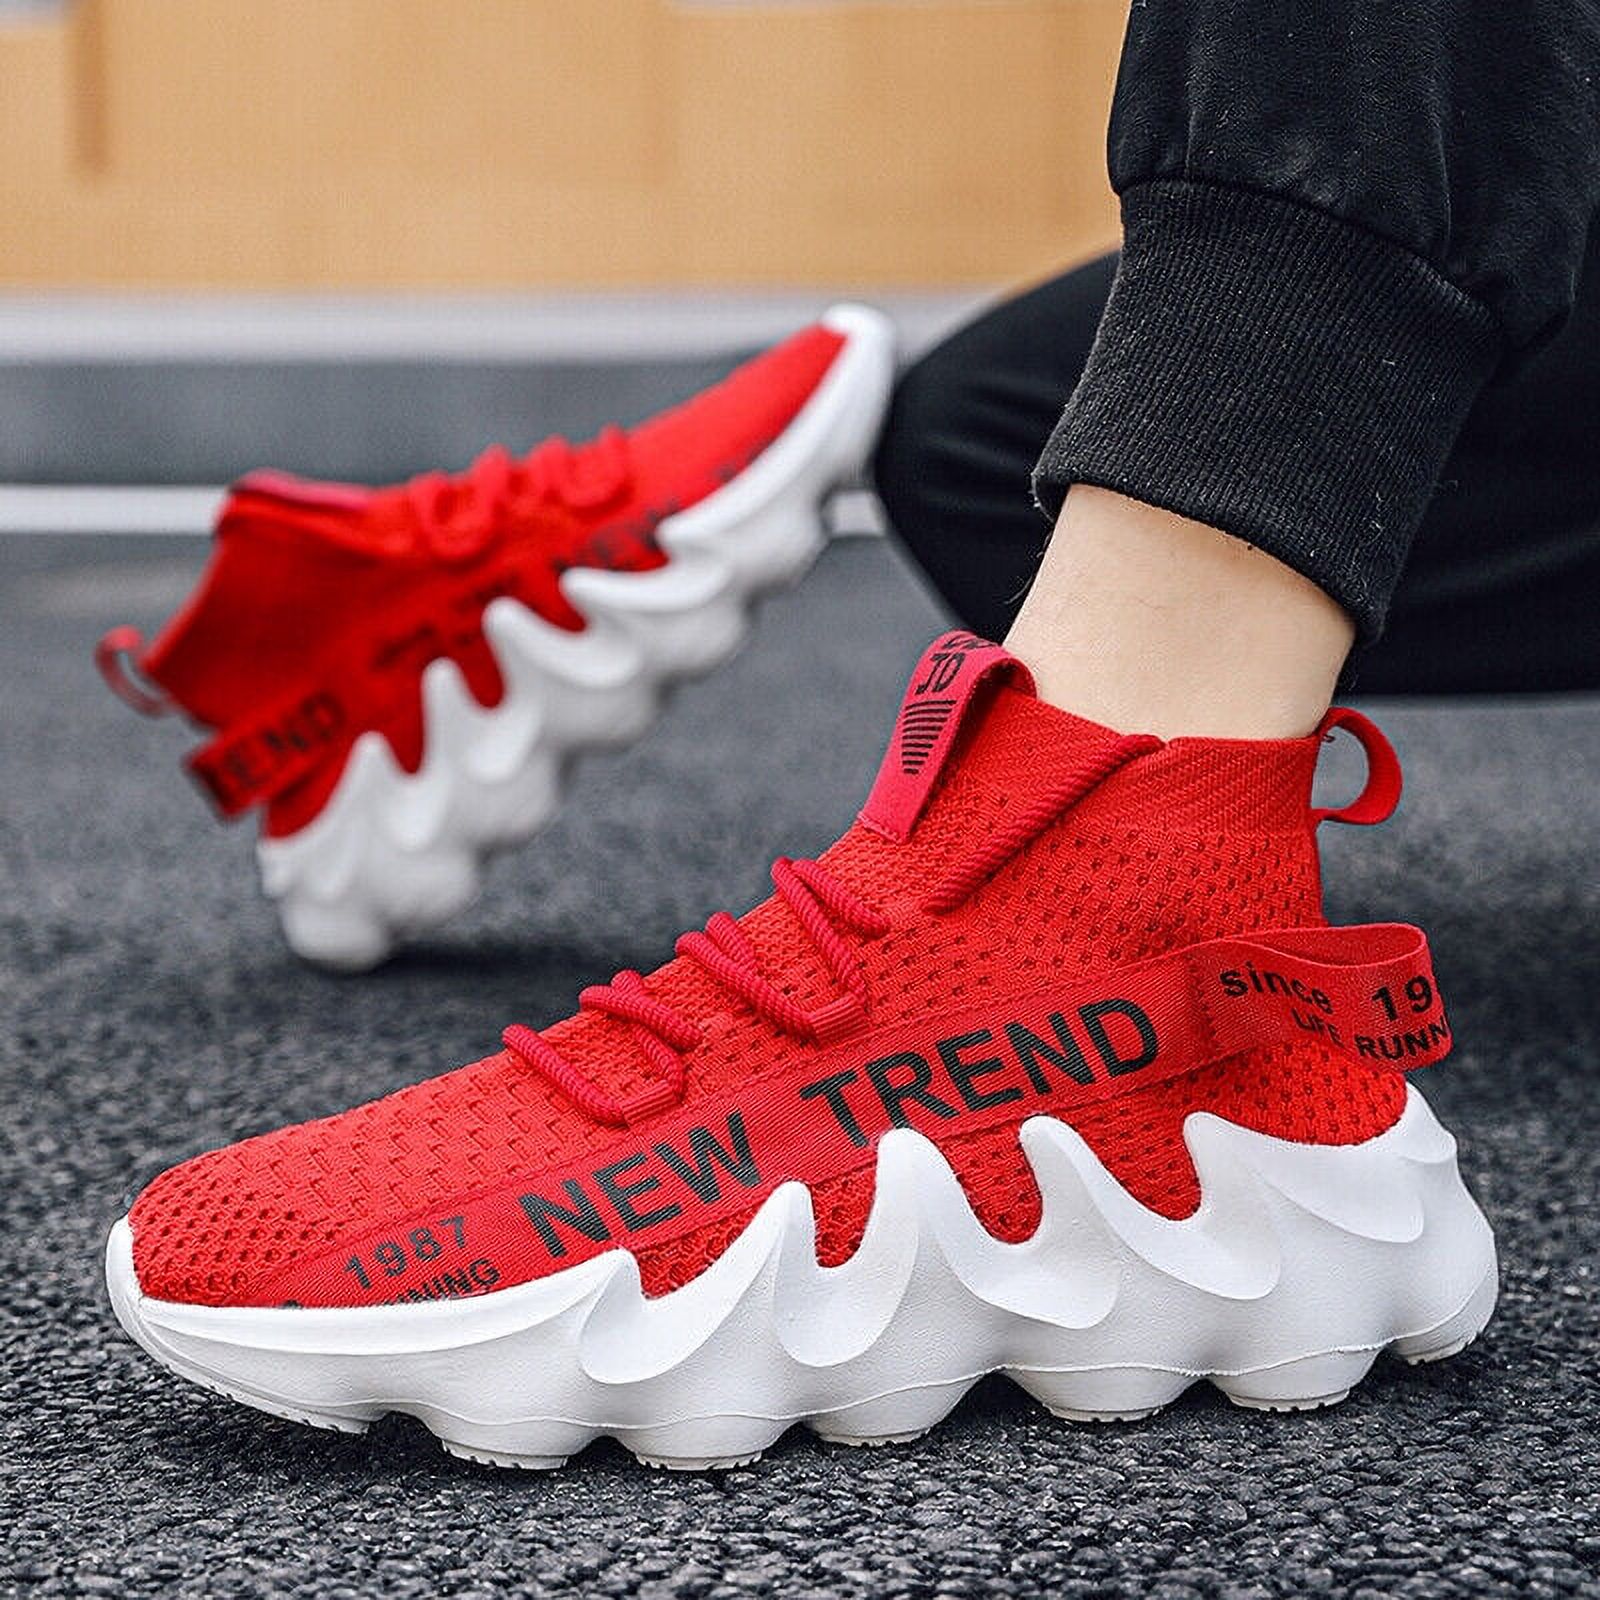 Running Shoes Sneakers Casual Men's Outdoor Athletic Jogging Sports Tennis Gym - image 4 of 17